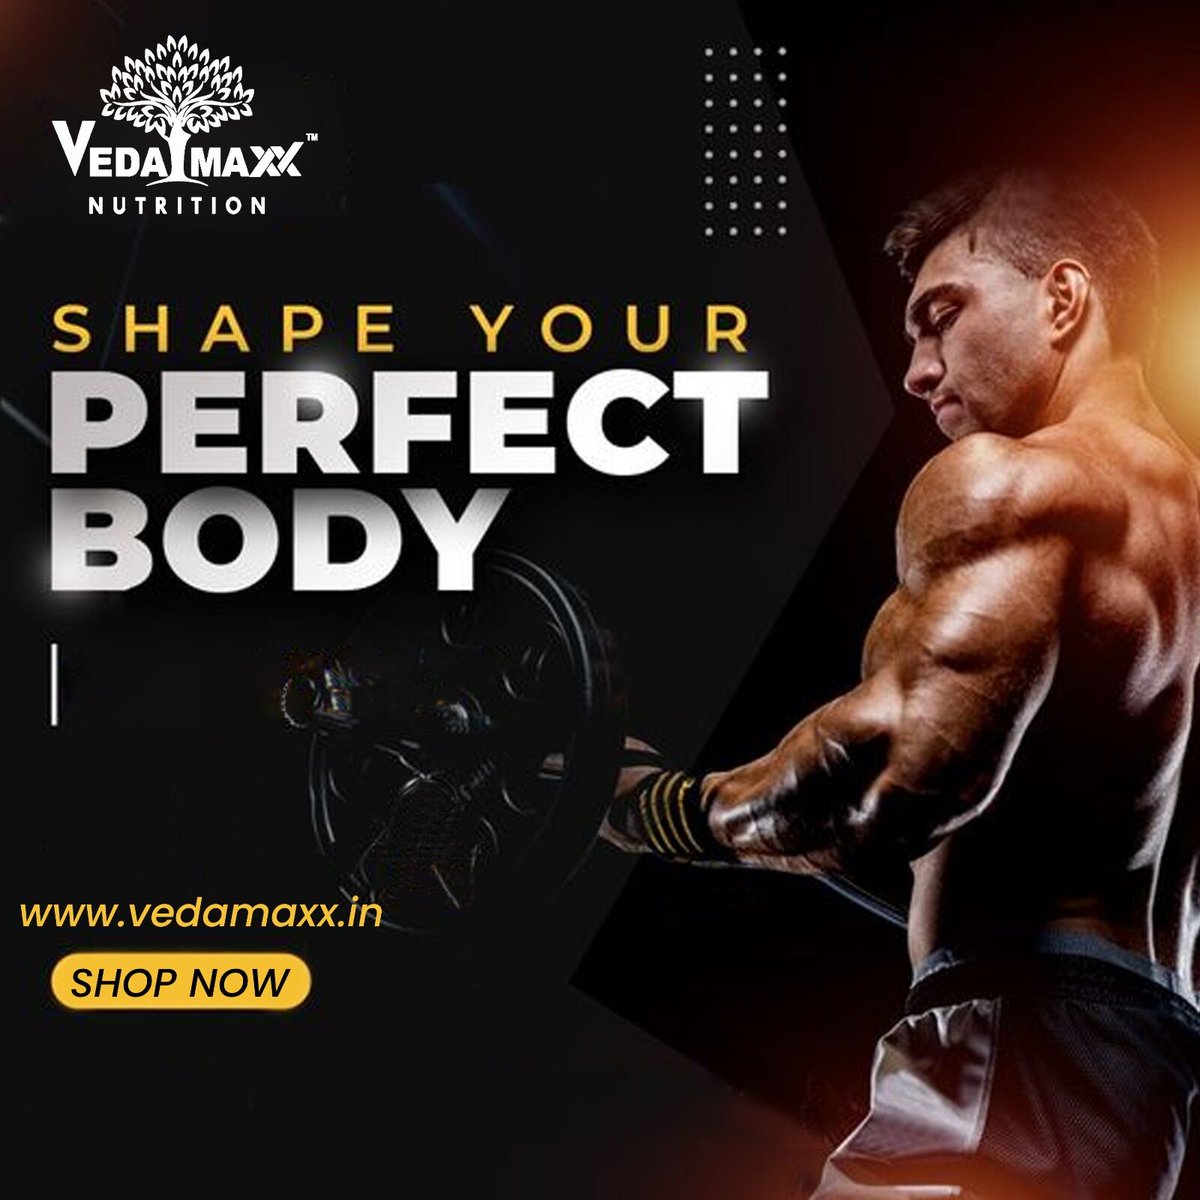 #bellyfats #bodybulding #bodyhealthy #capsule #curatedcloset #fitness #fitnessbabes #fitnessaddict #fitnessbeauty #fitnessblog #fitnesscouple #fitnesscoaches #fitnessboys #fitnessfam #fitnessvideo #fitnessvenezuela #fitnesspro #fitnesspassion
#vedamaxxnutrition